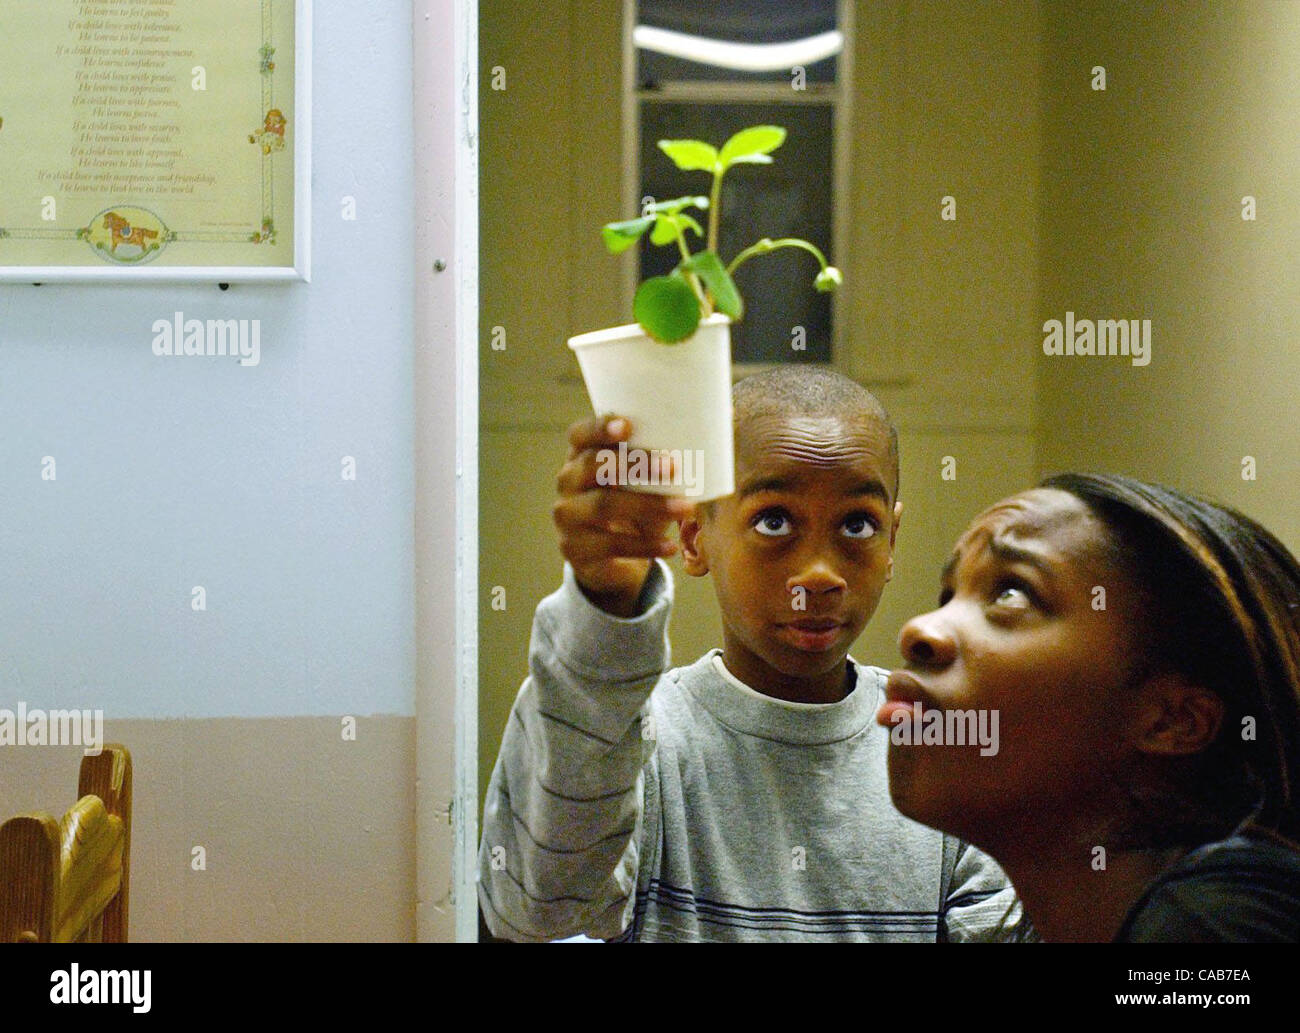 Proud of his strawberry plant, Krystian Brooks, 11, shows it off to housemate Donnisha Moore, 14, Thursday morning, May 13, 2004. The youth live in transitional housing at the Bay Area Rescue Mission.   (Contra Costa Newspapers/Joanna Jhanda) Stock Photo